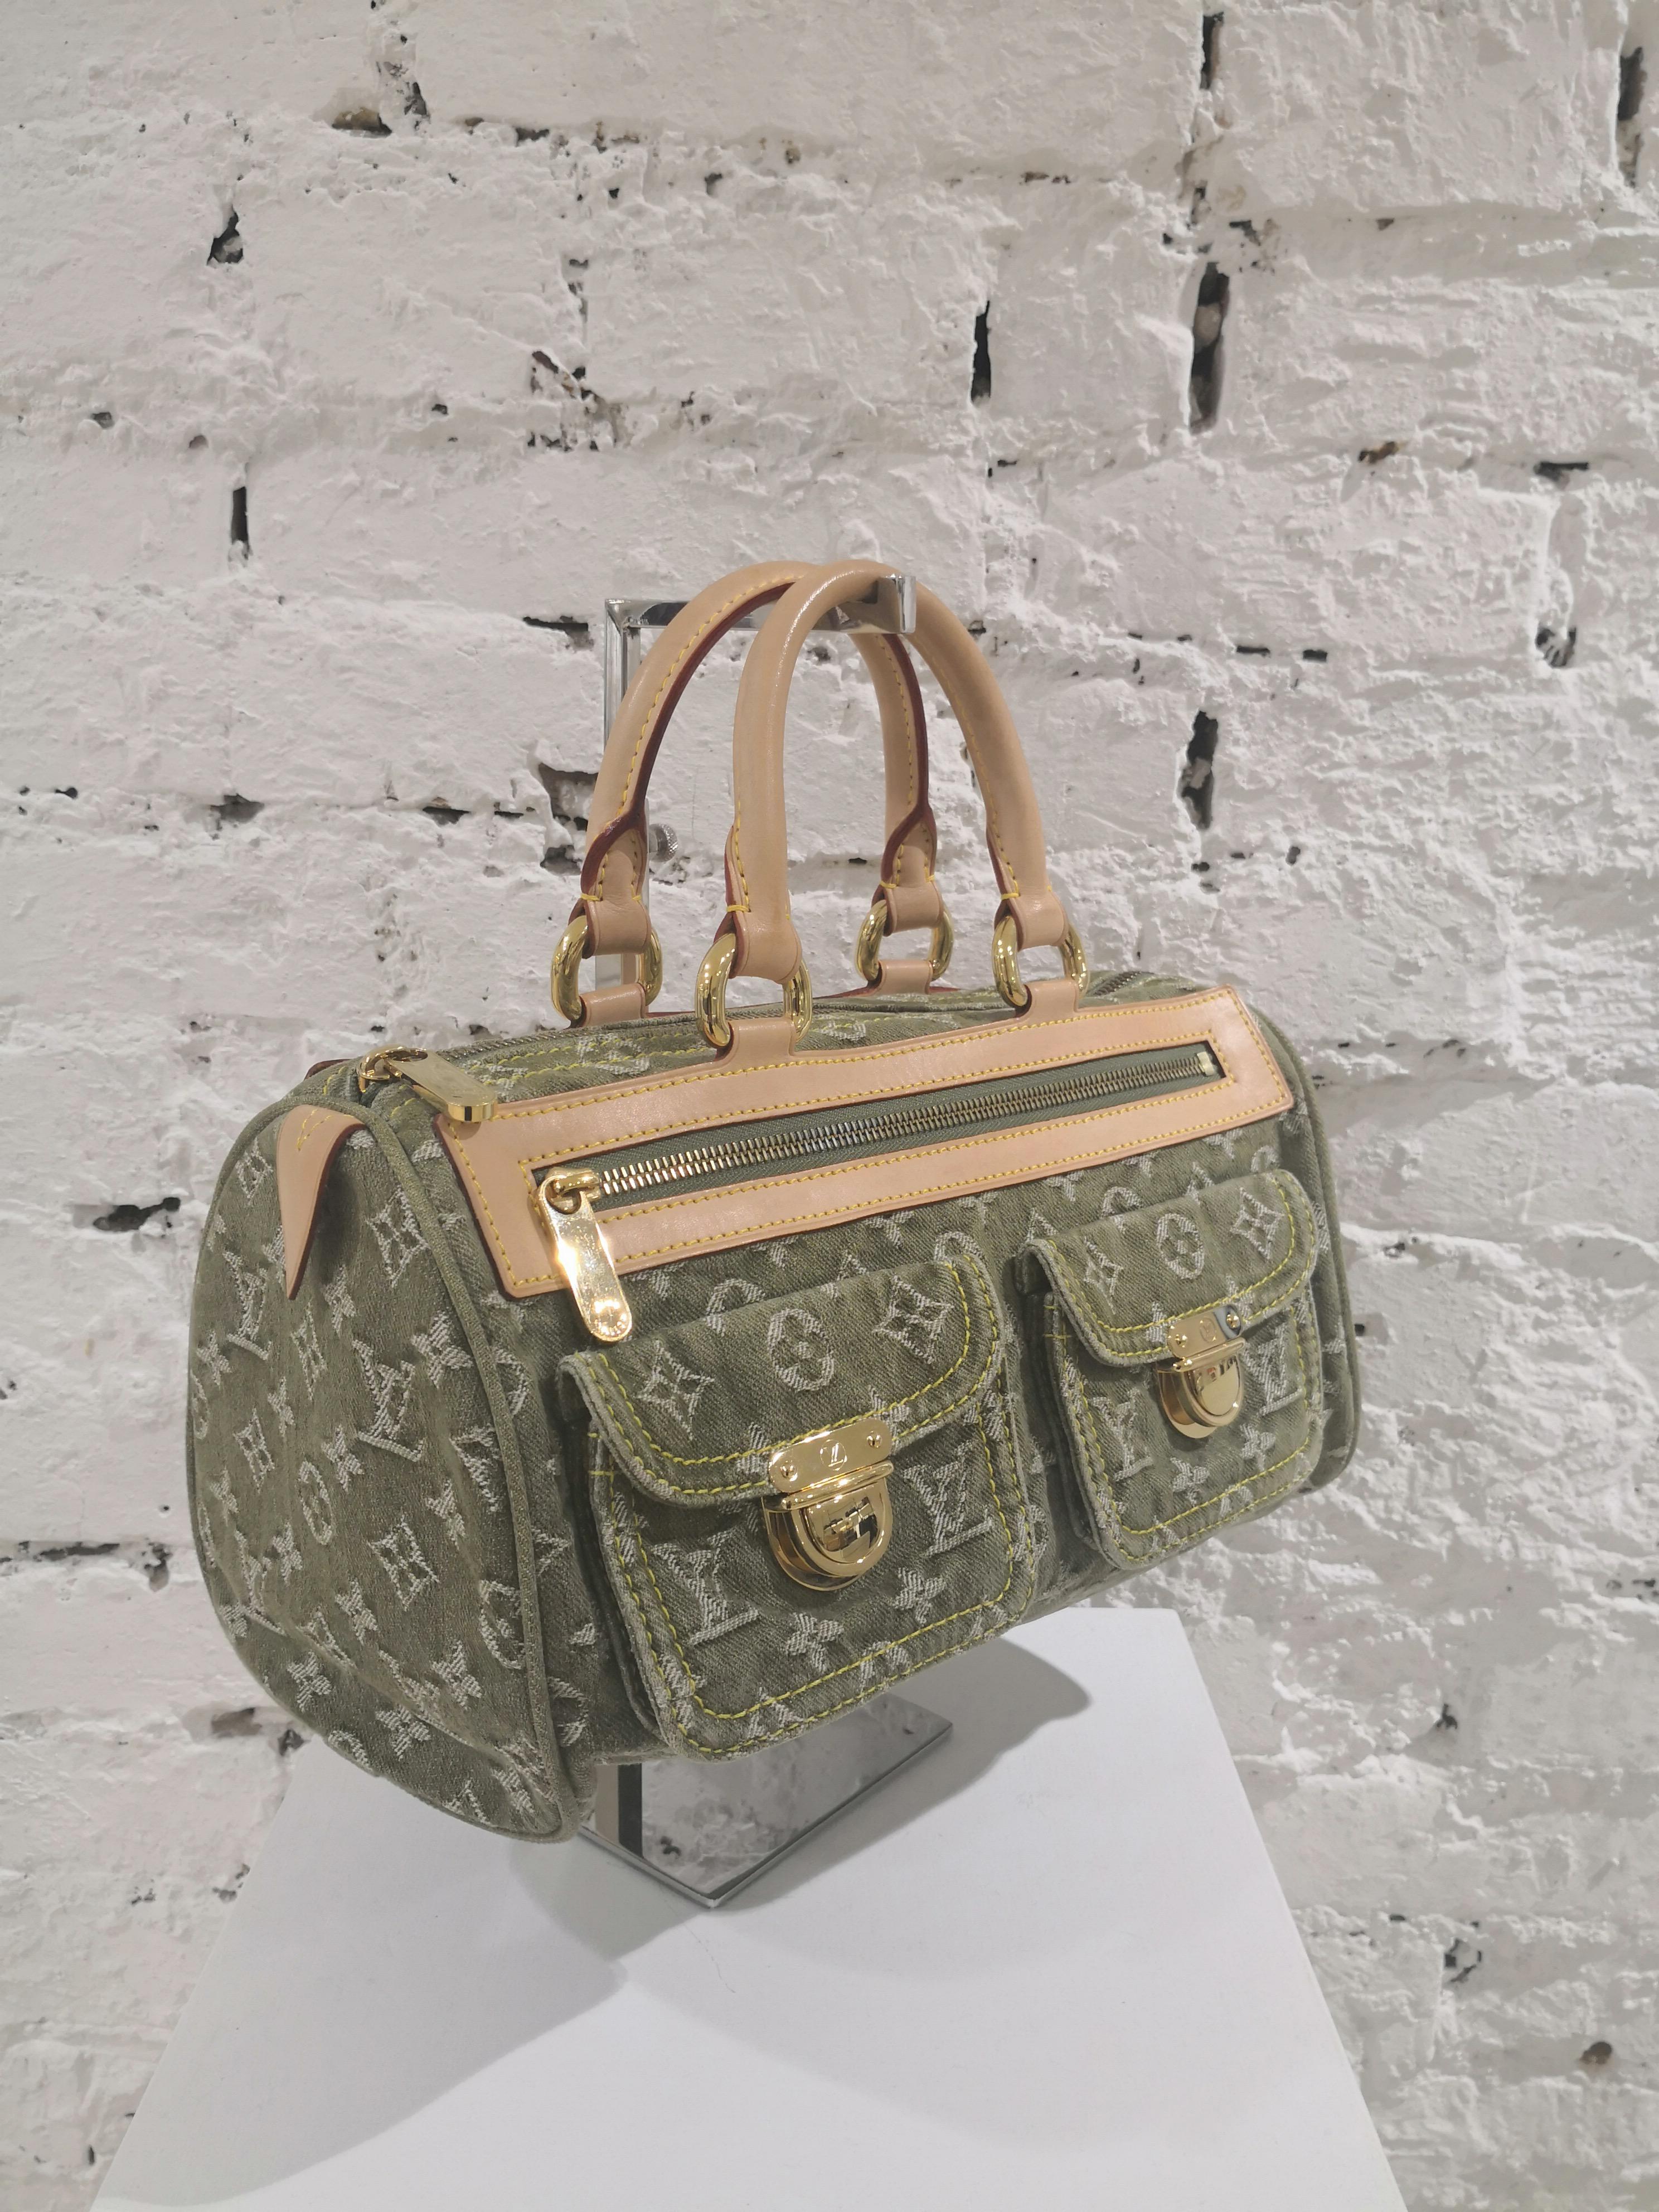 Louis Vuitton Green Denim Neo Speedy Bag
From LV creative head Marc Jacobs monogram Denim Collection, this chic handbag combines soft denim and Louis Vuitton classic detailing. The bag is made from green stone washed denim and tan leather trim with